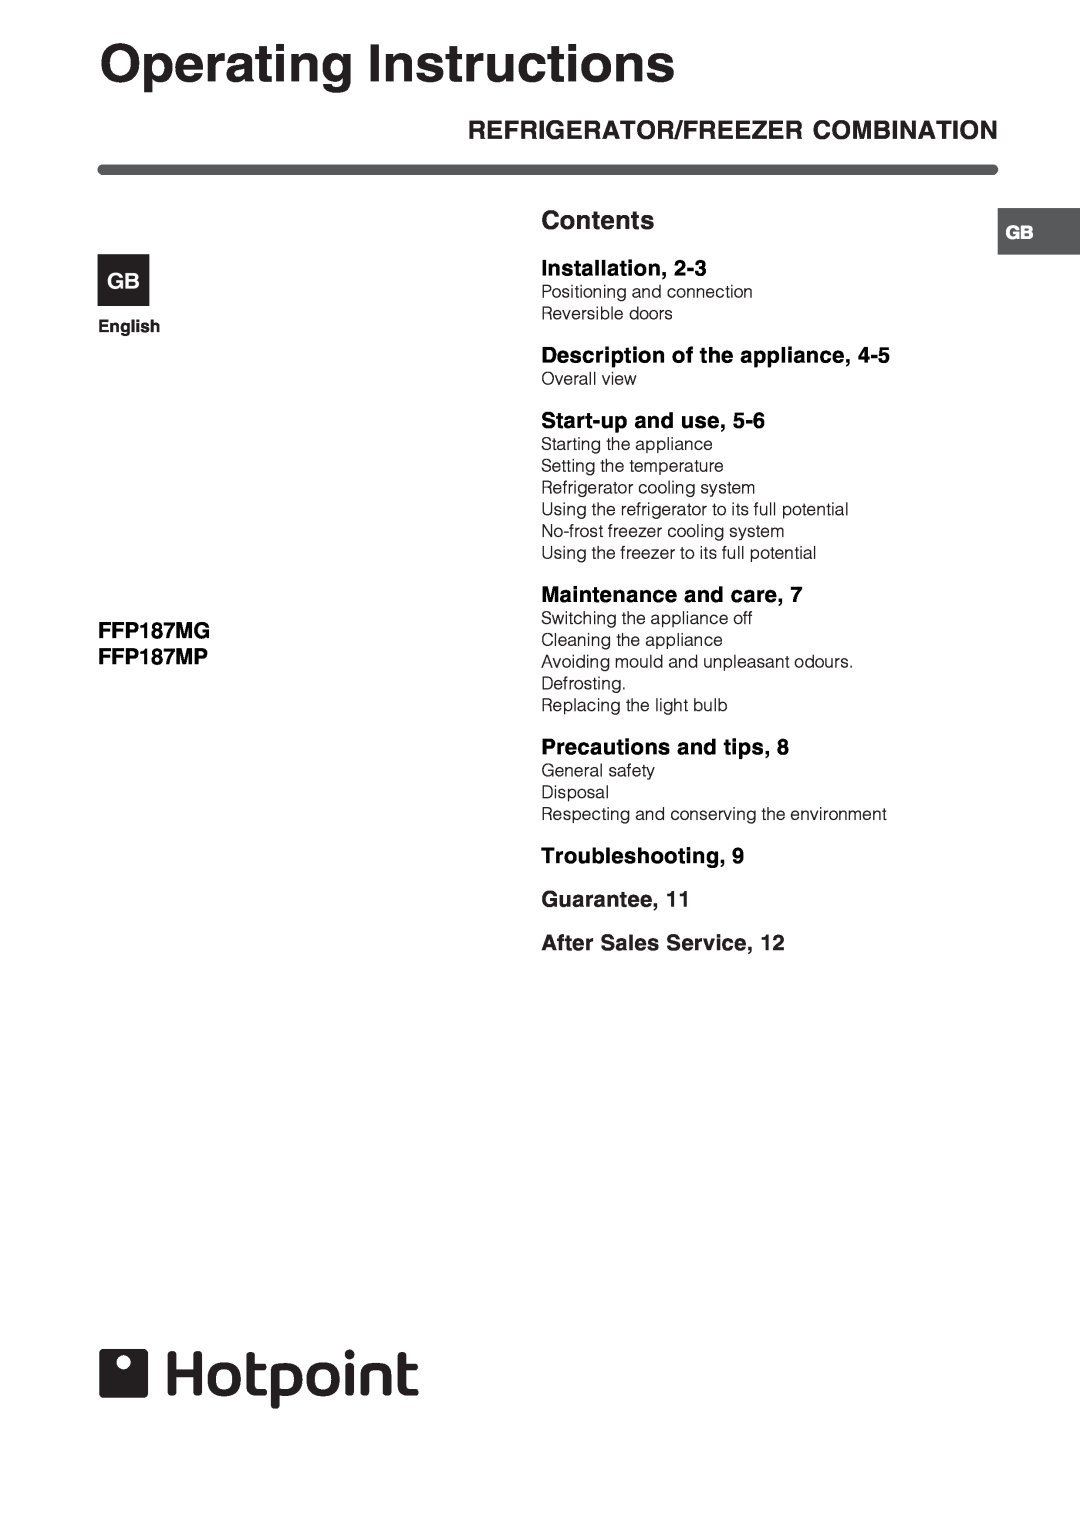 Hotpoint FFP187MG manual Operating Instructions, Installation, Description of the appliance, Start-up and use, Contents 